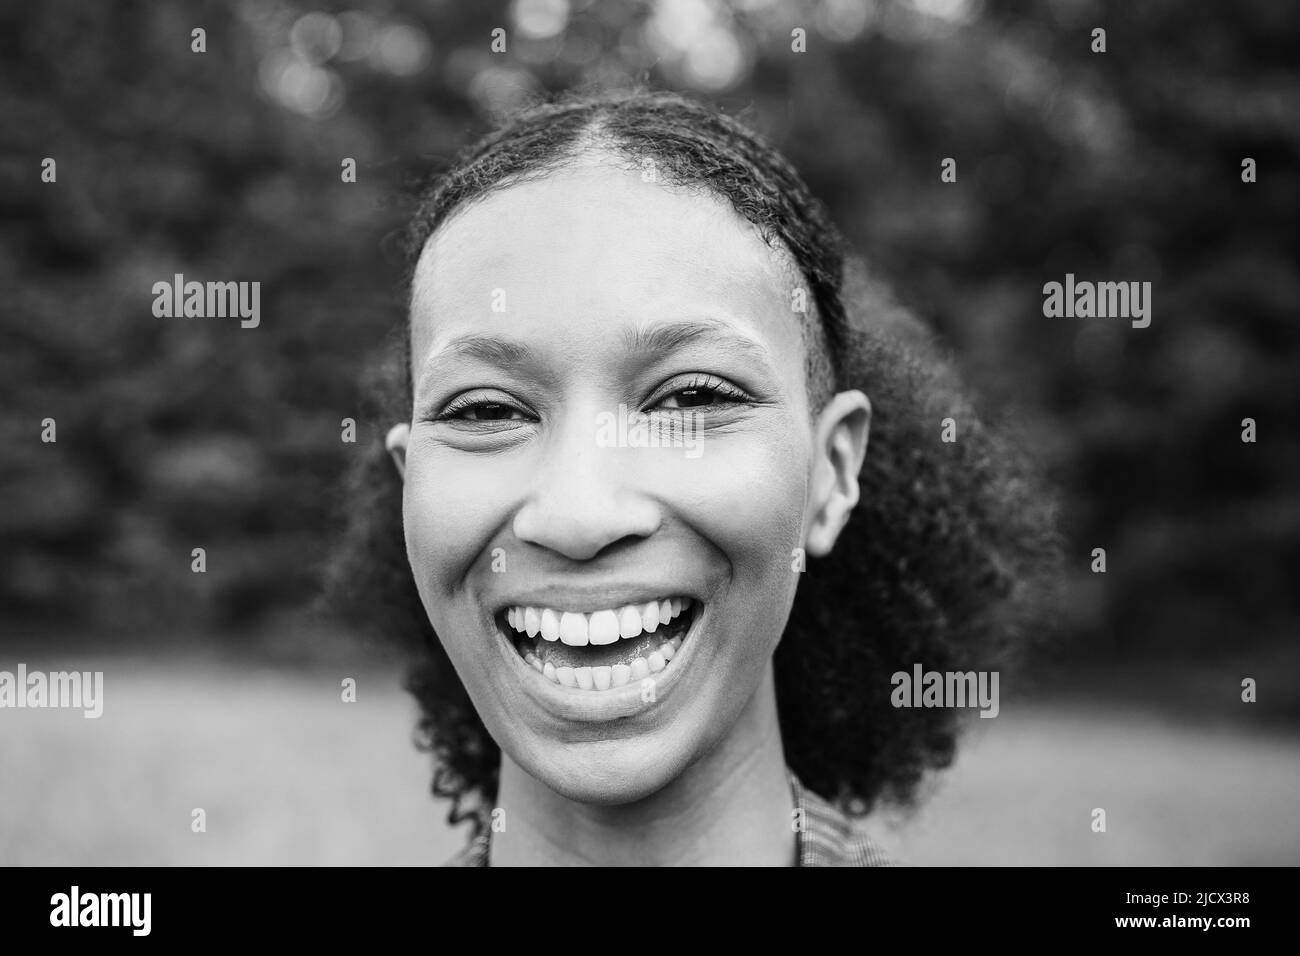 Young african girl smiling on camera outdoor - Focus on face - Black and white editing Stock Photo